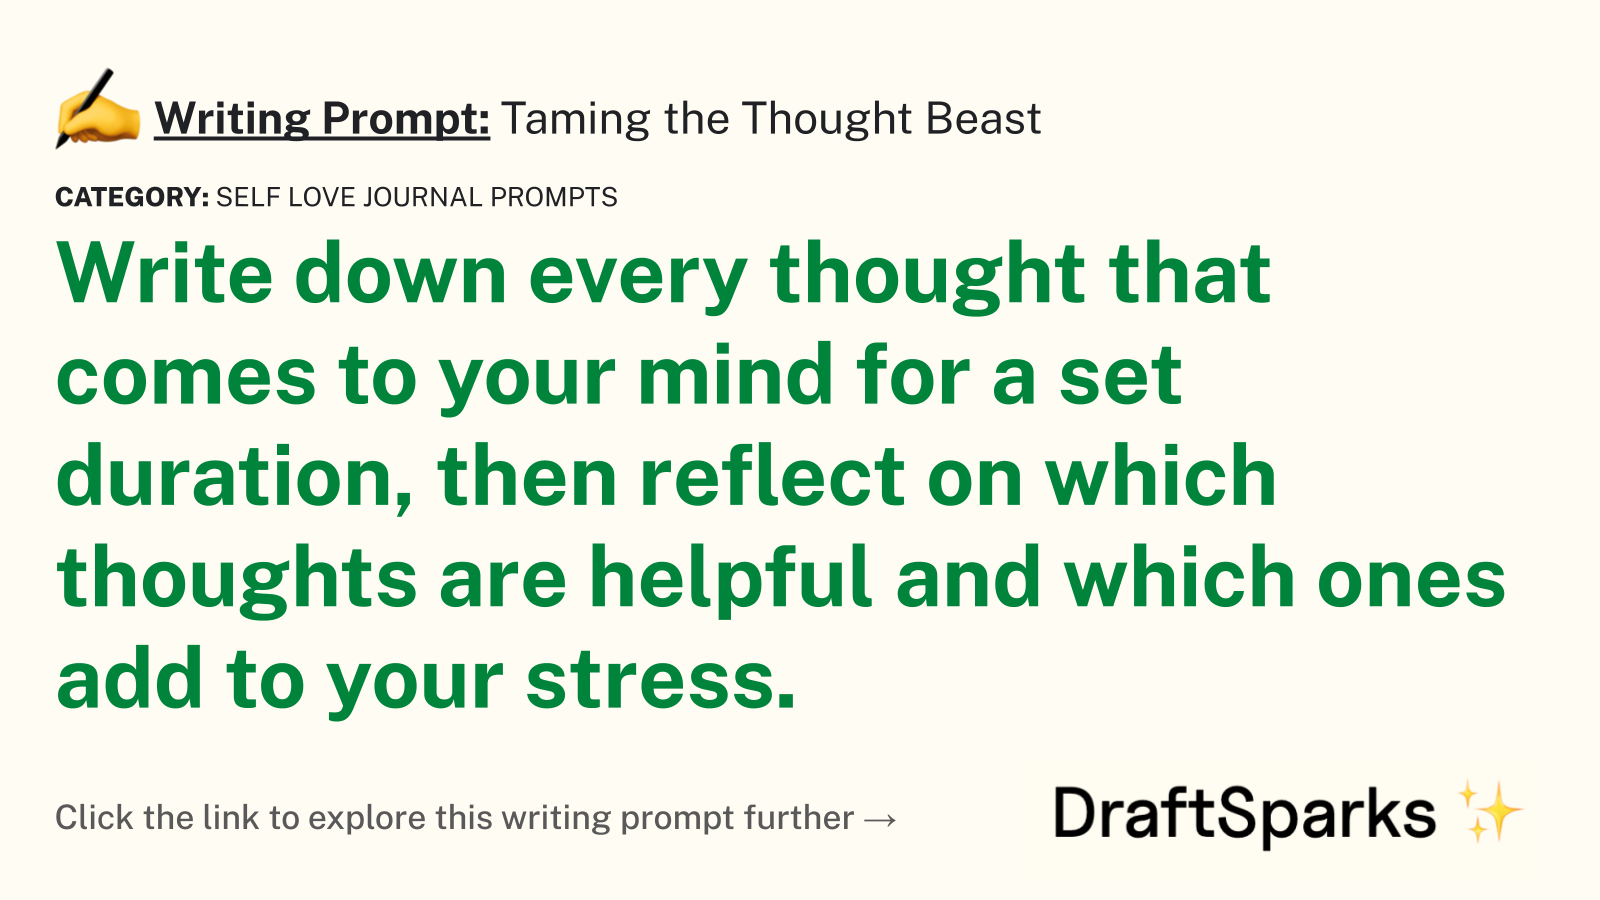 Taming the Thought Beast